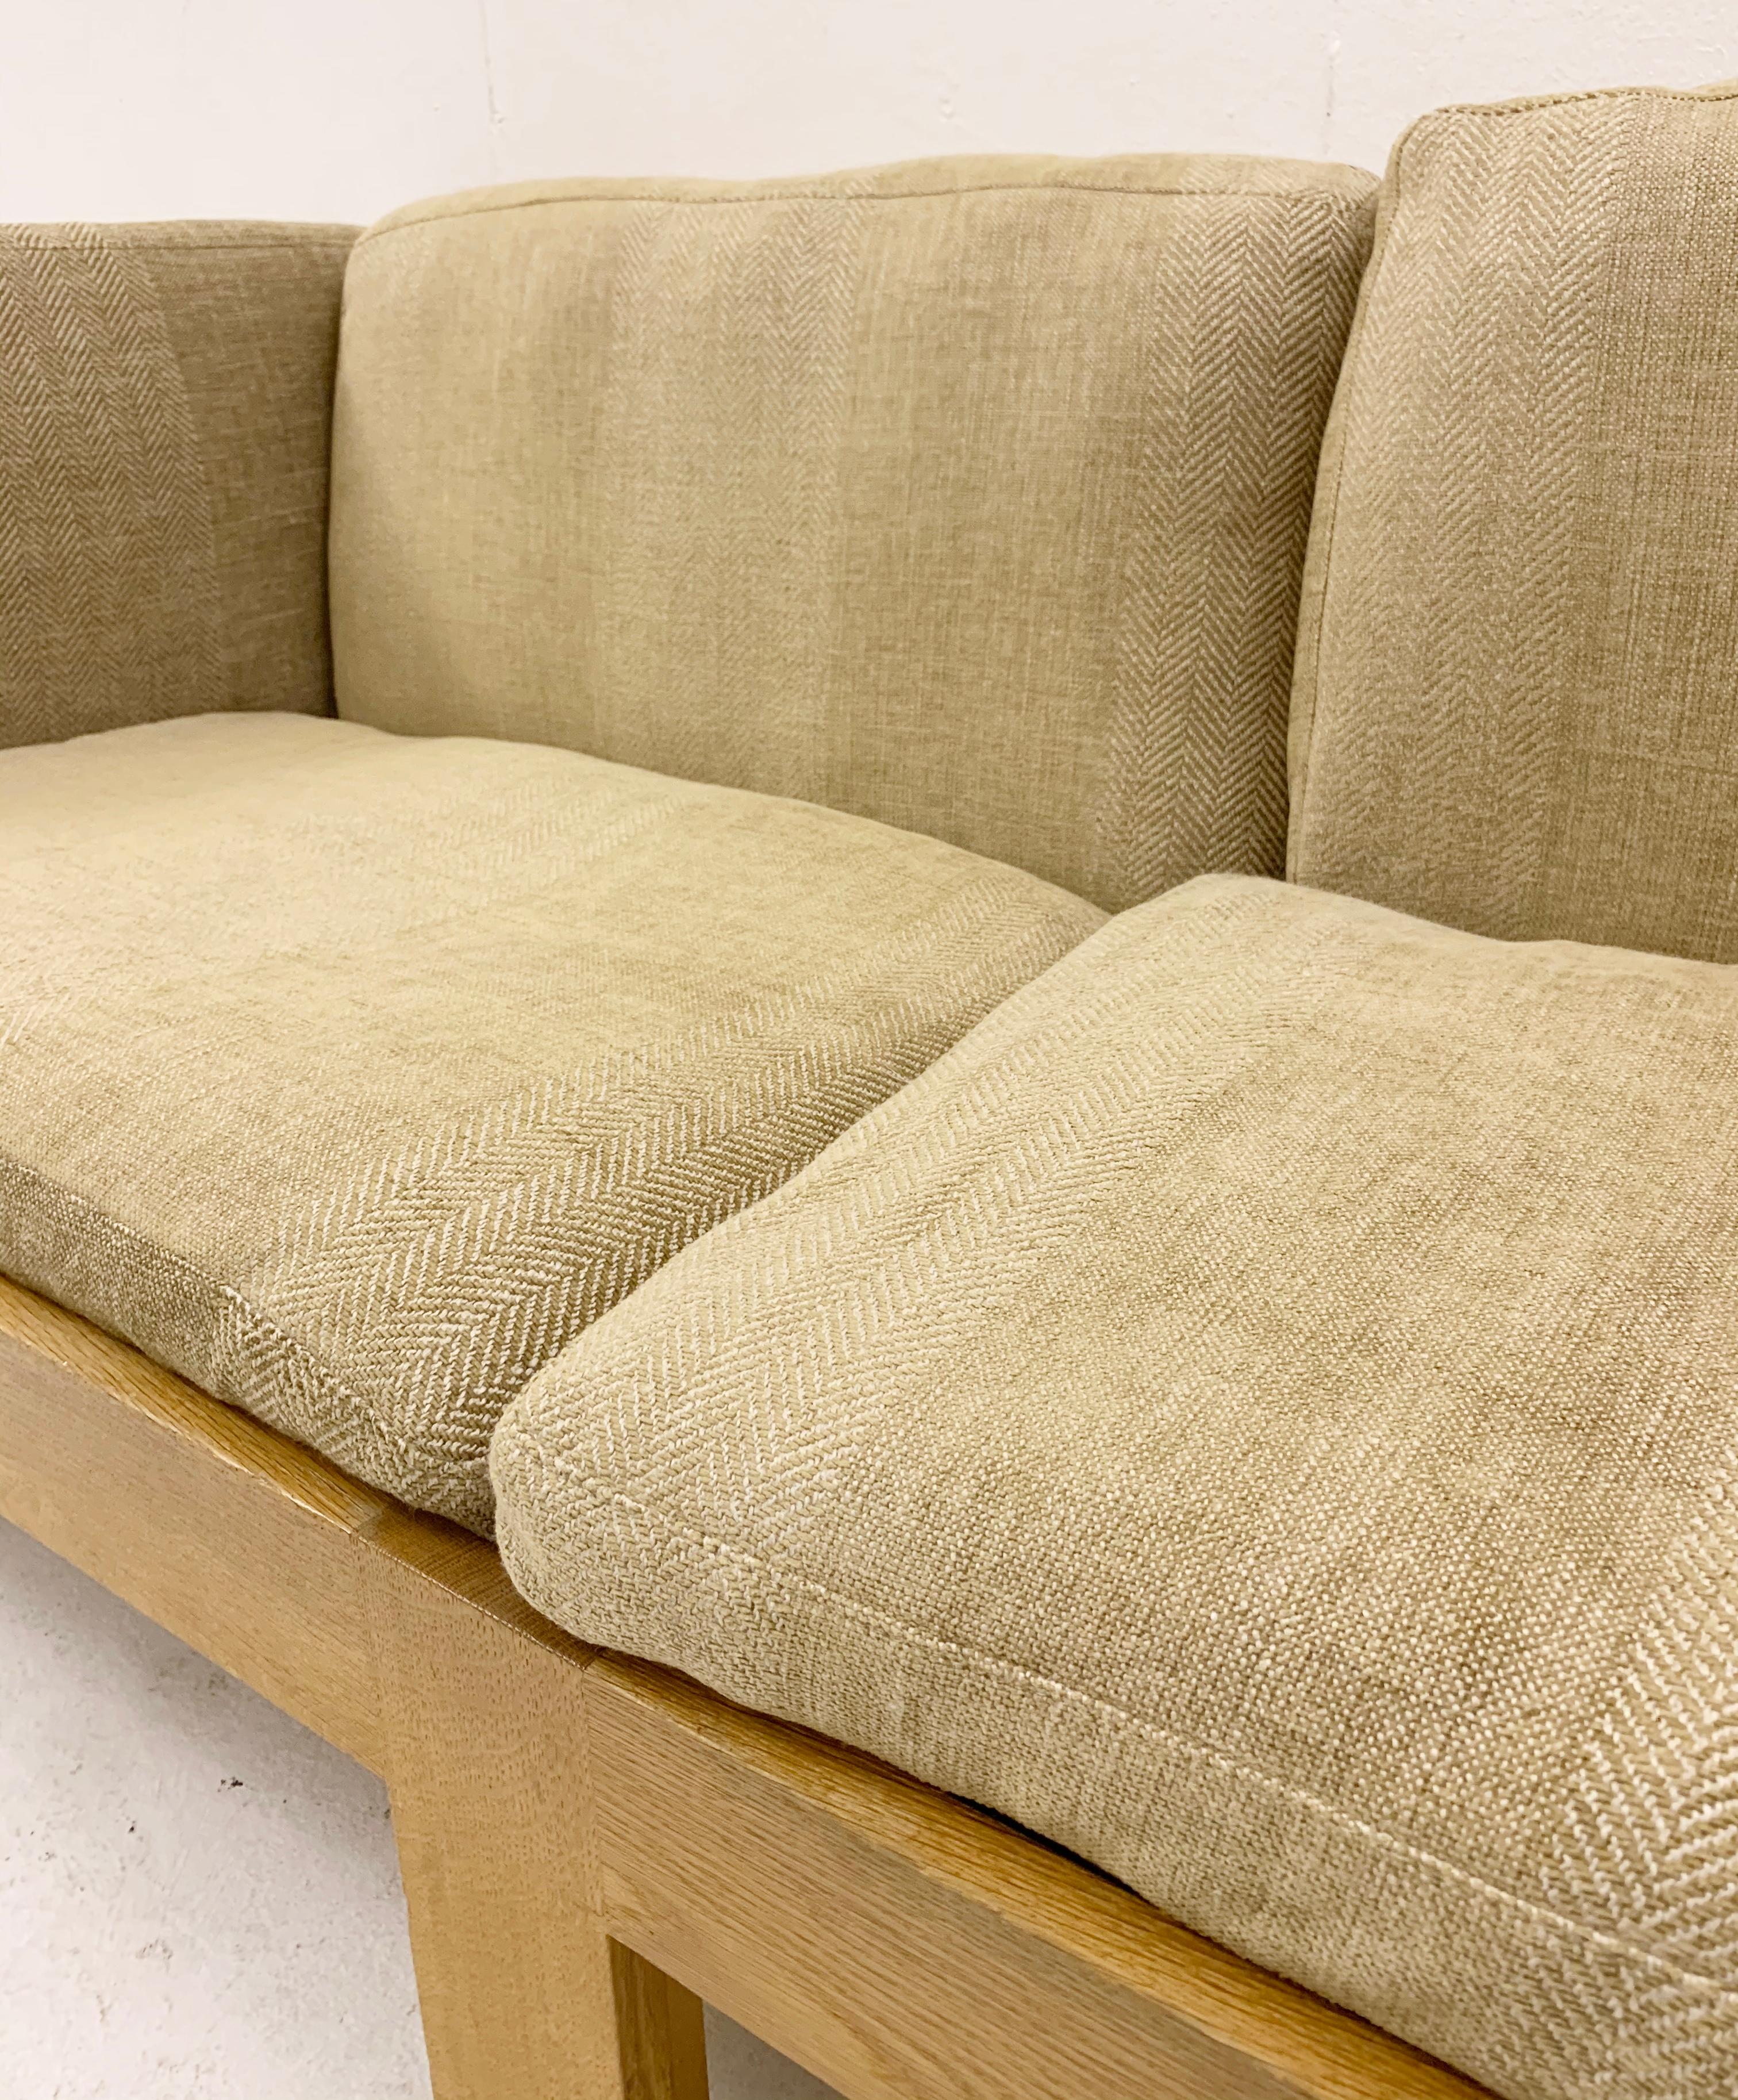 Mid-20th Century Mid-Century Oak Sofa by Tage Poulsen, Denmark, 1960s For Sale